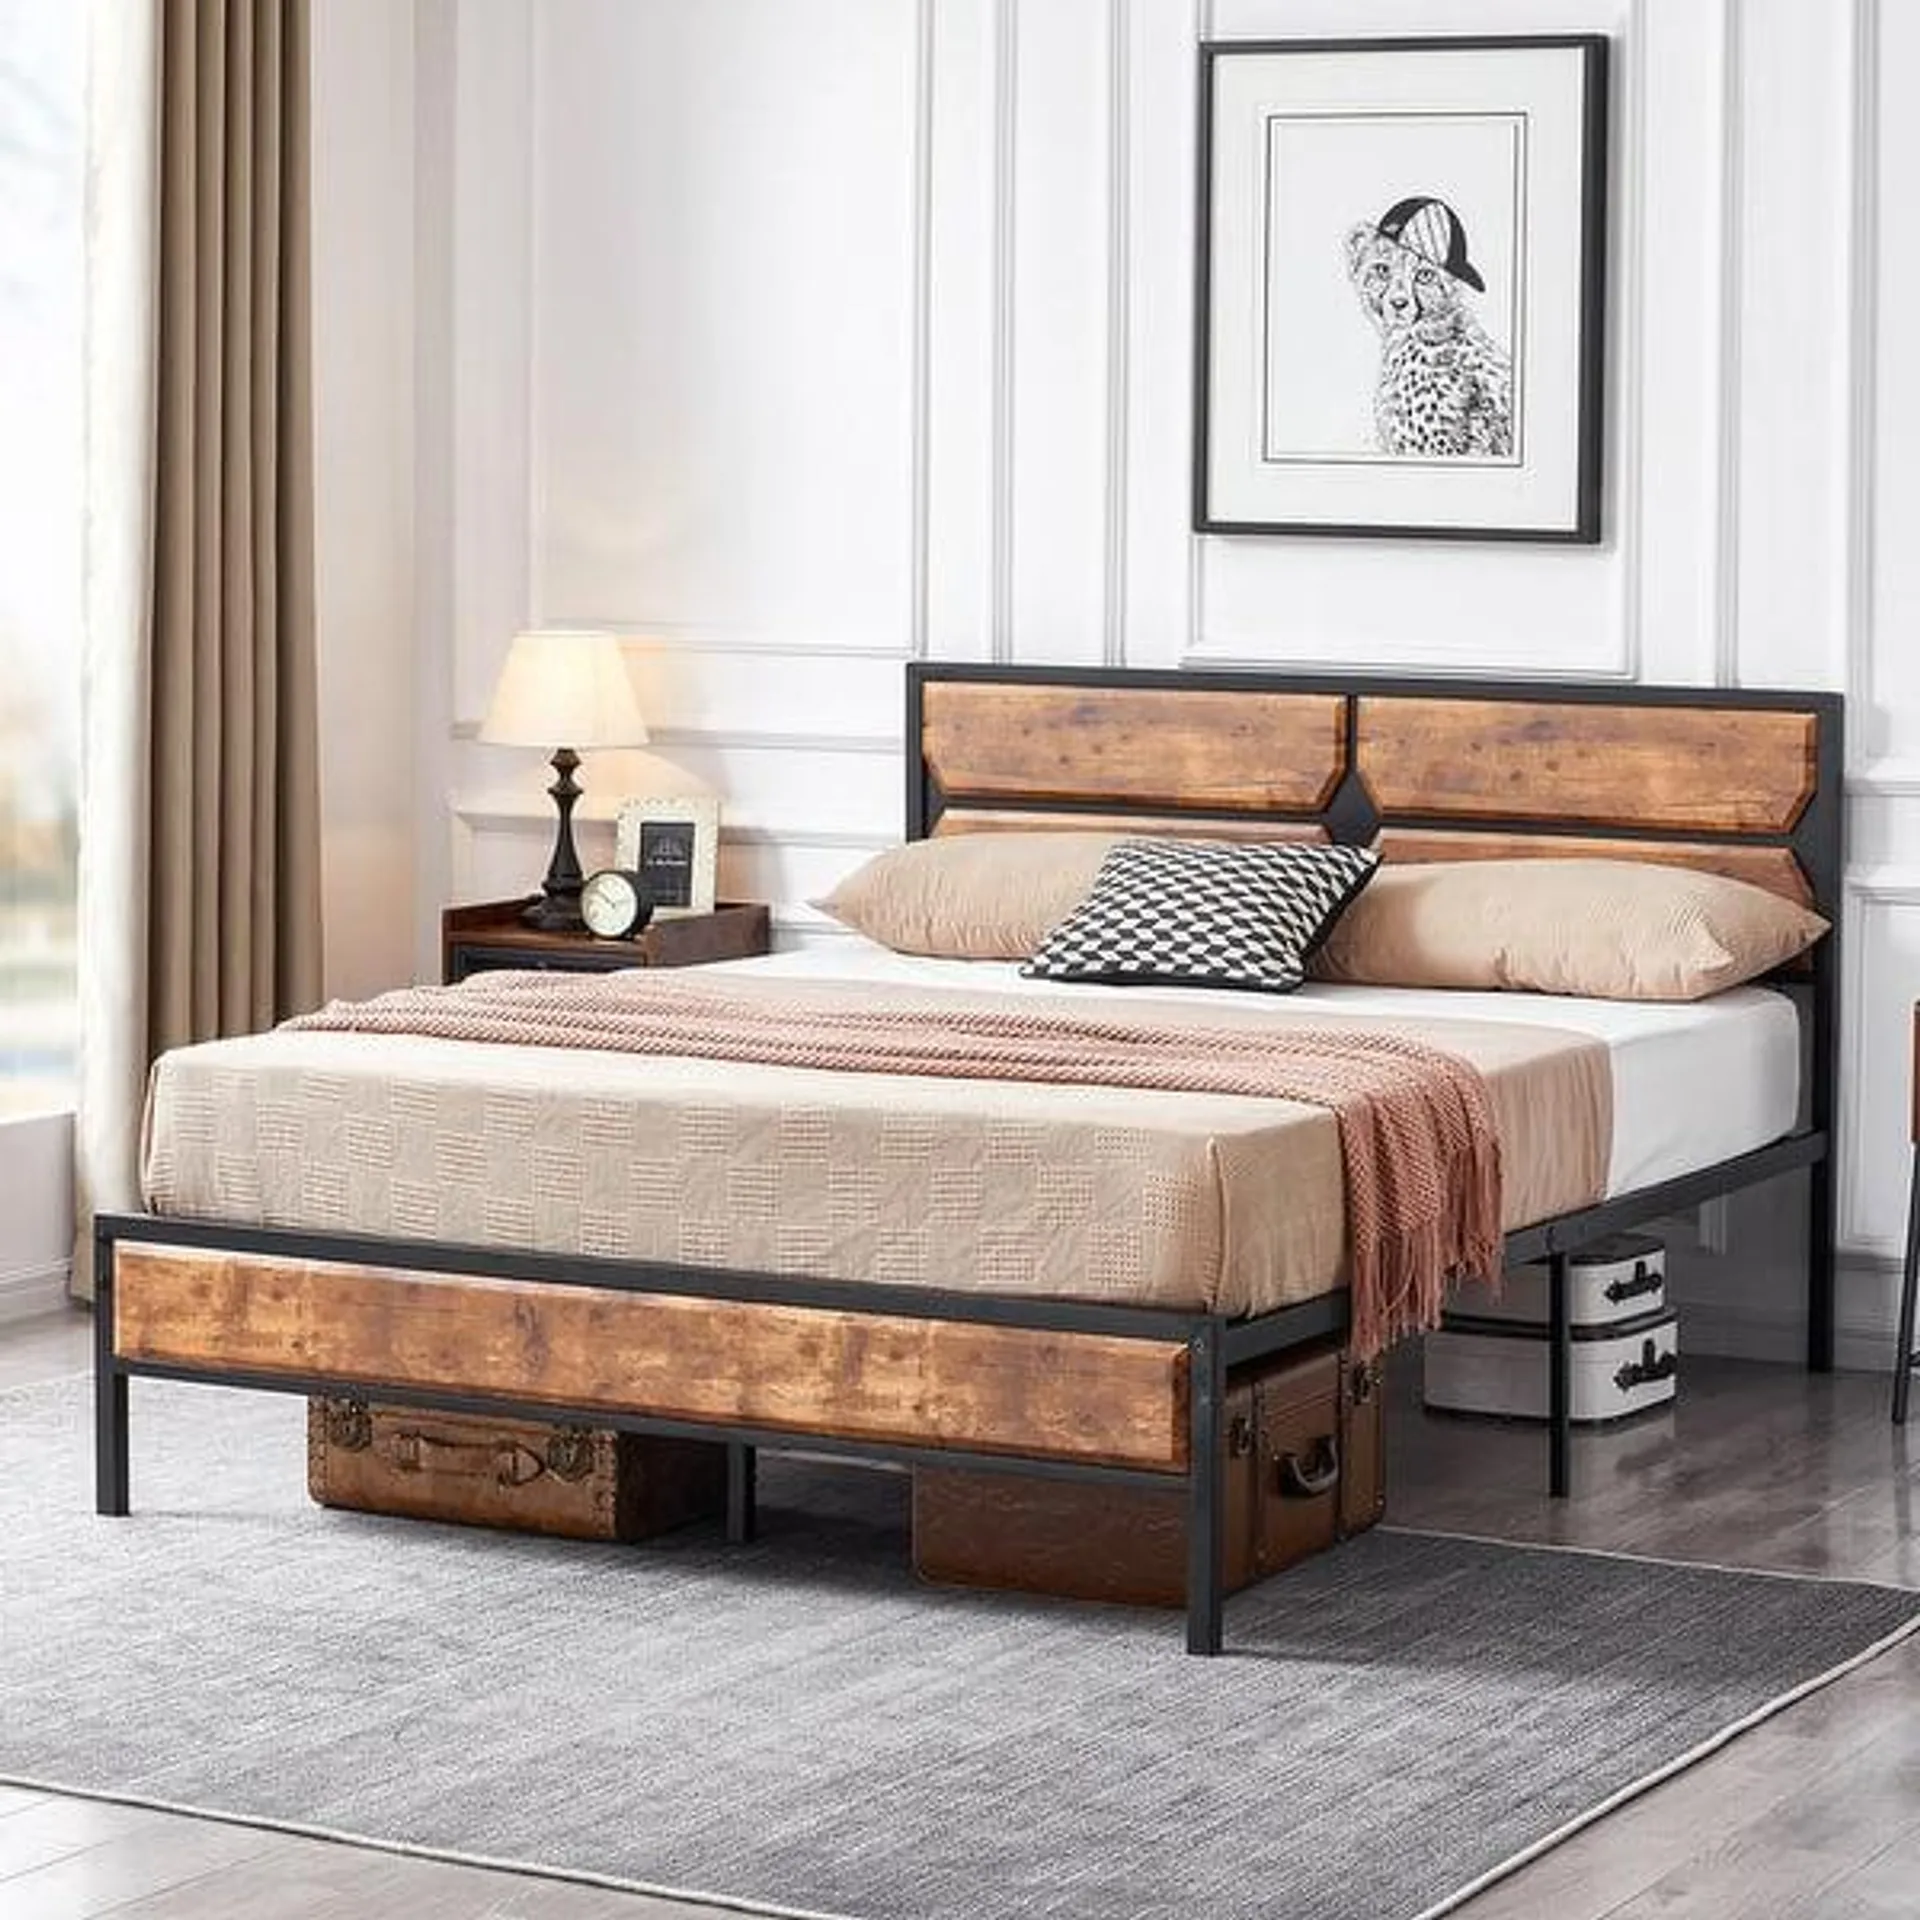 VECELO Industrial Bed Frame with Headboard,Twin/Full/Queen Size Beds